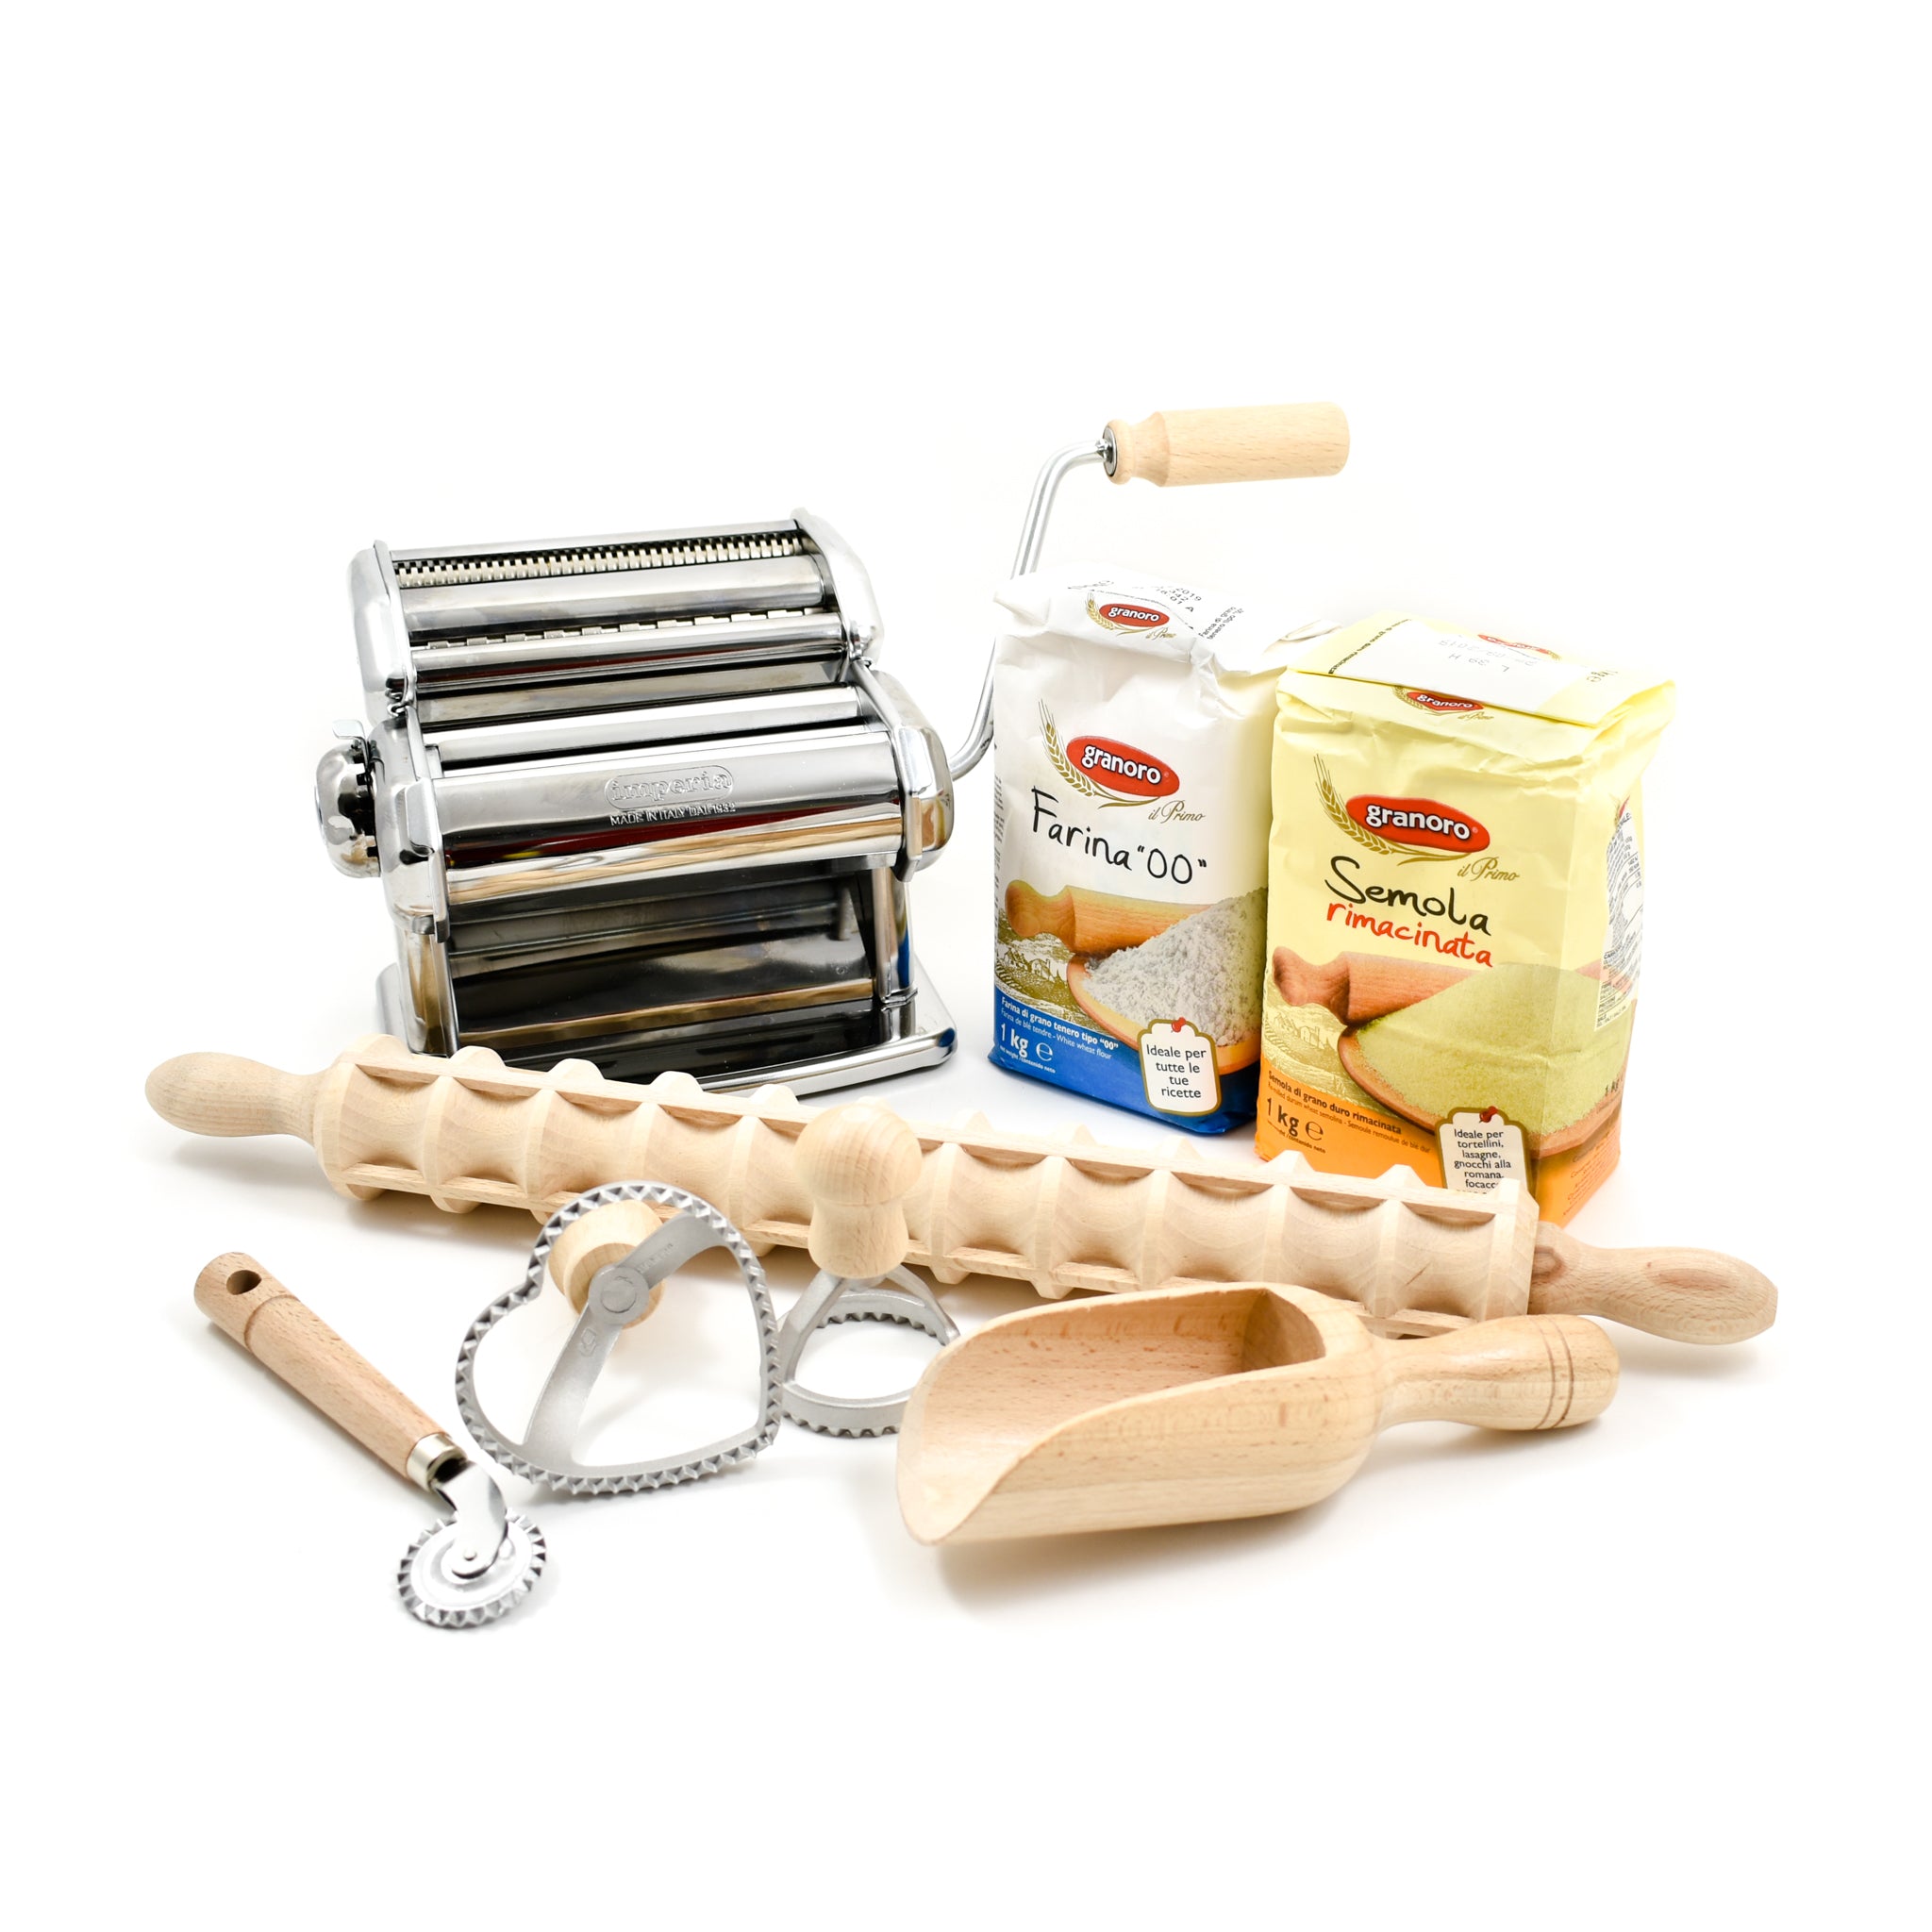 Sous Chef Kit Complete Pasta Making Kit Gifts Cookbook & Ingredients Sets